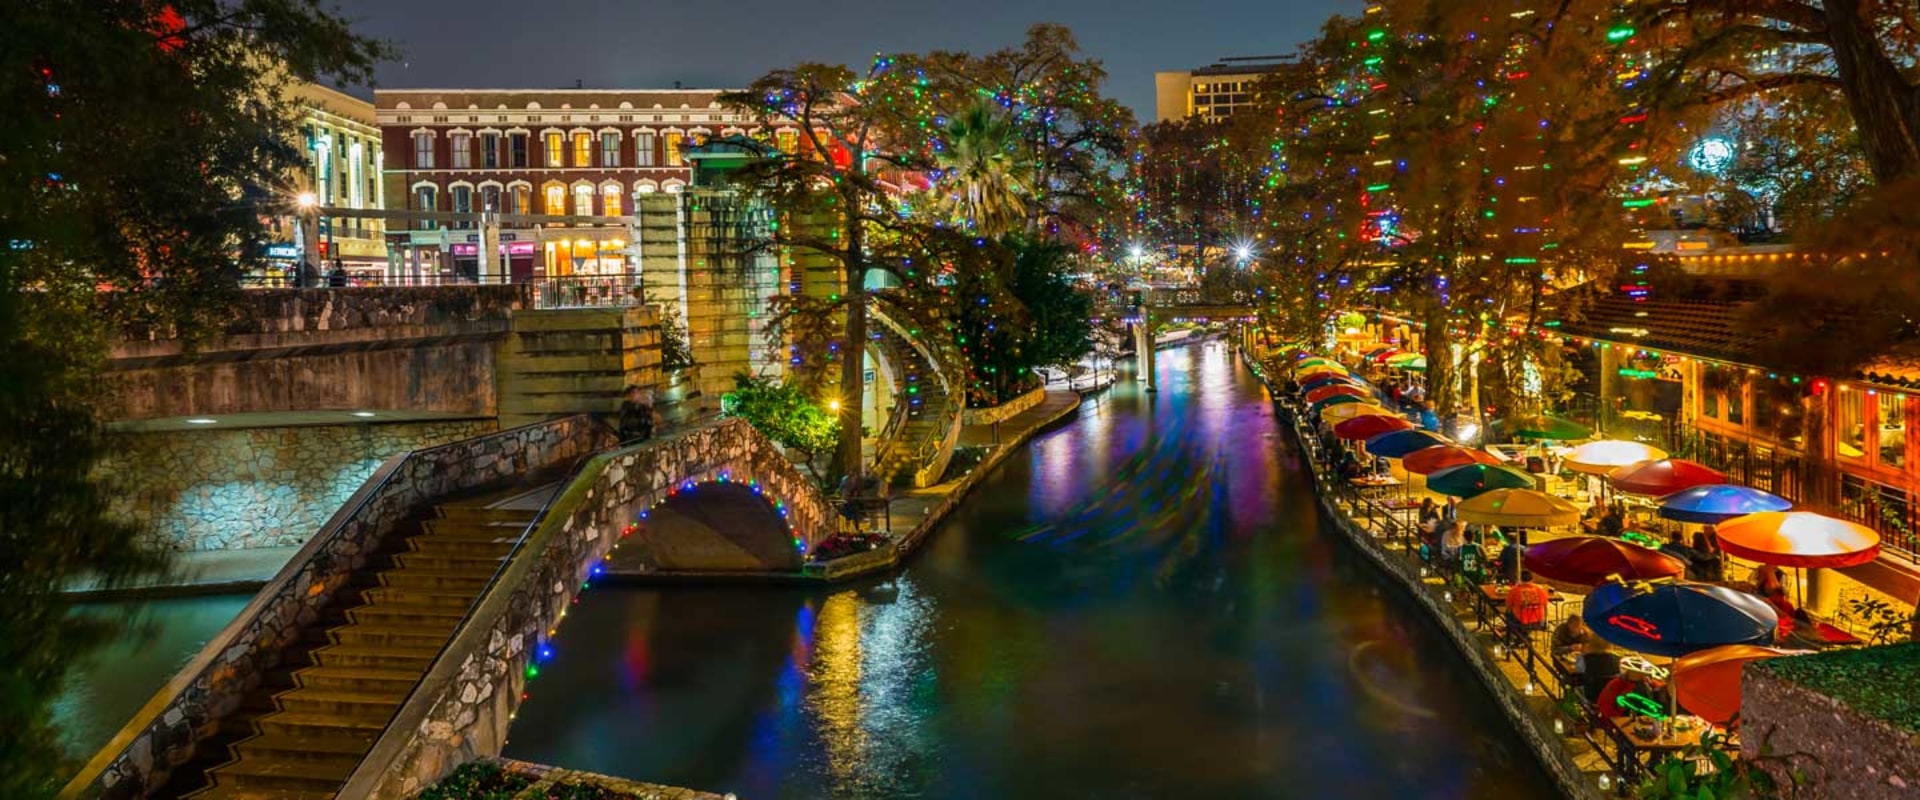 What's special about san antonio texas?